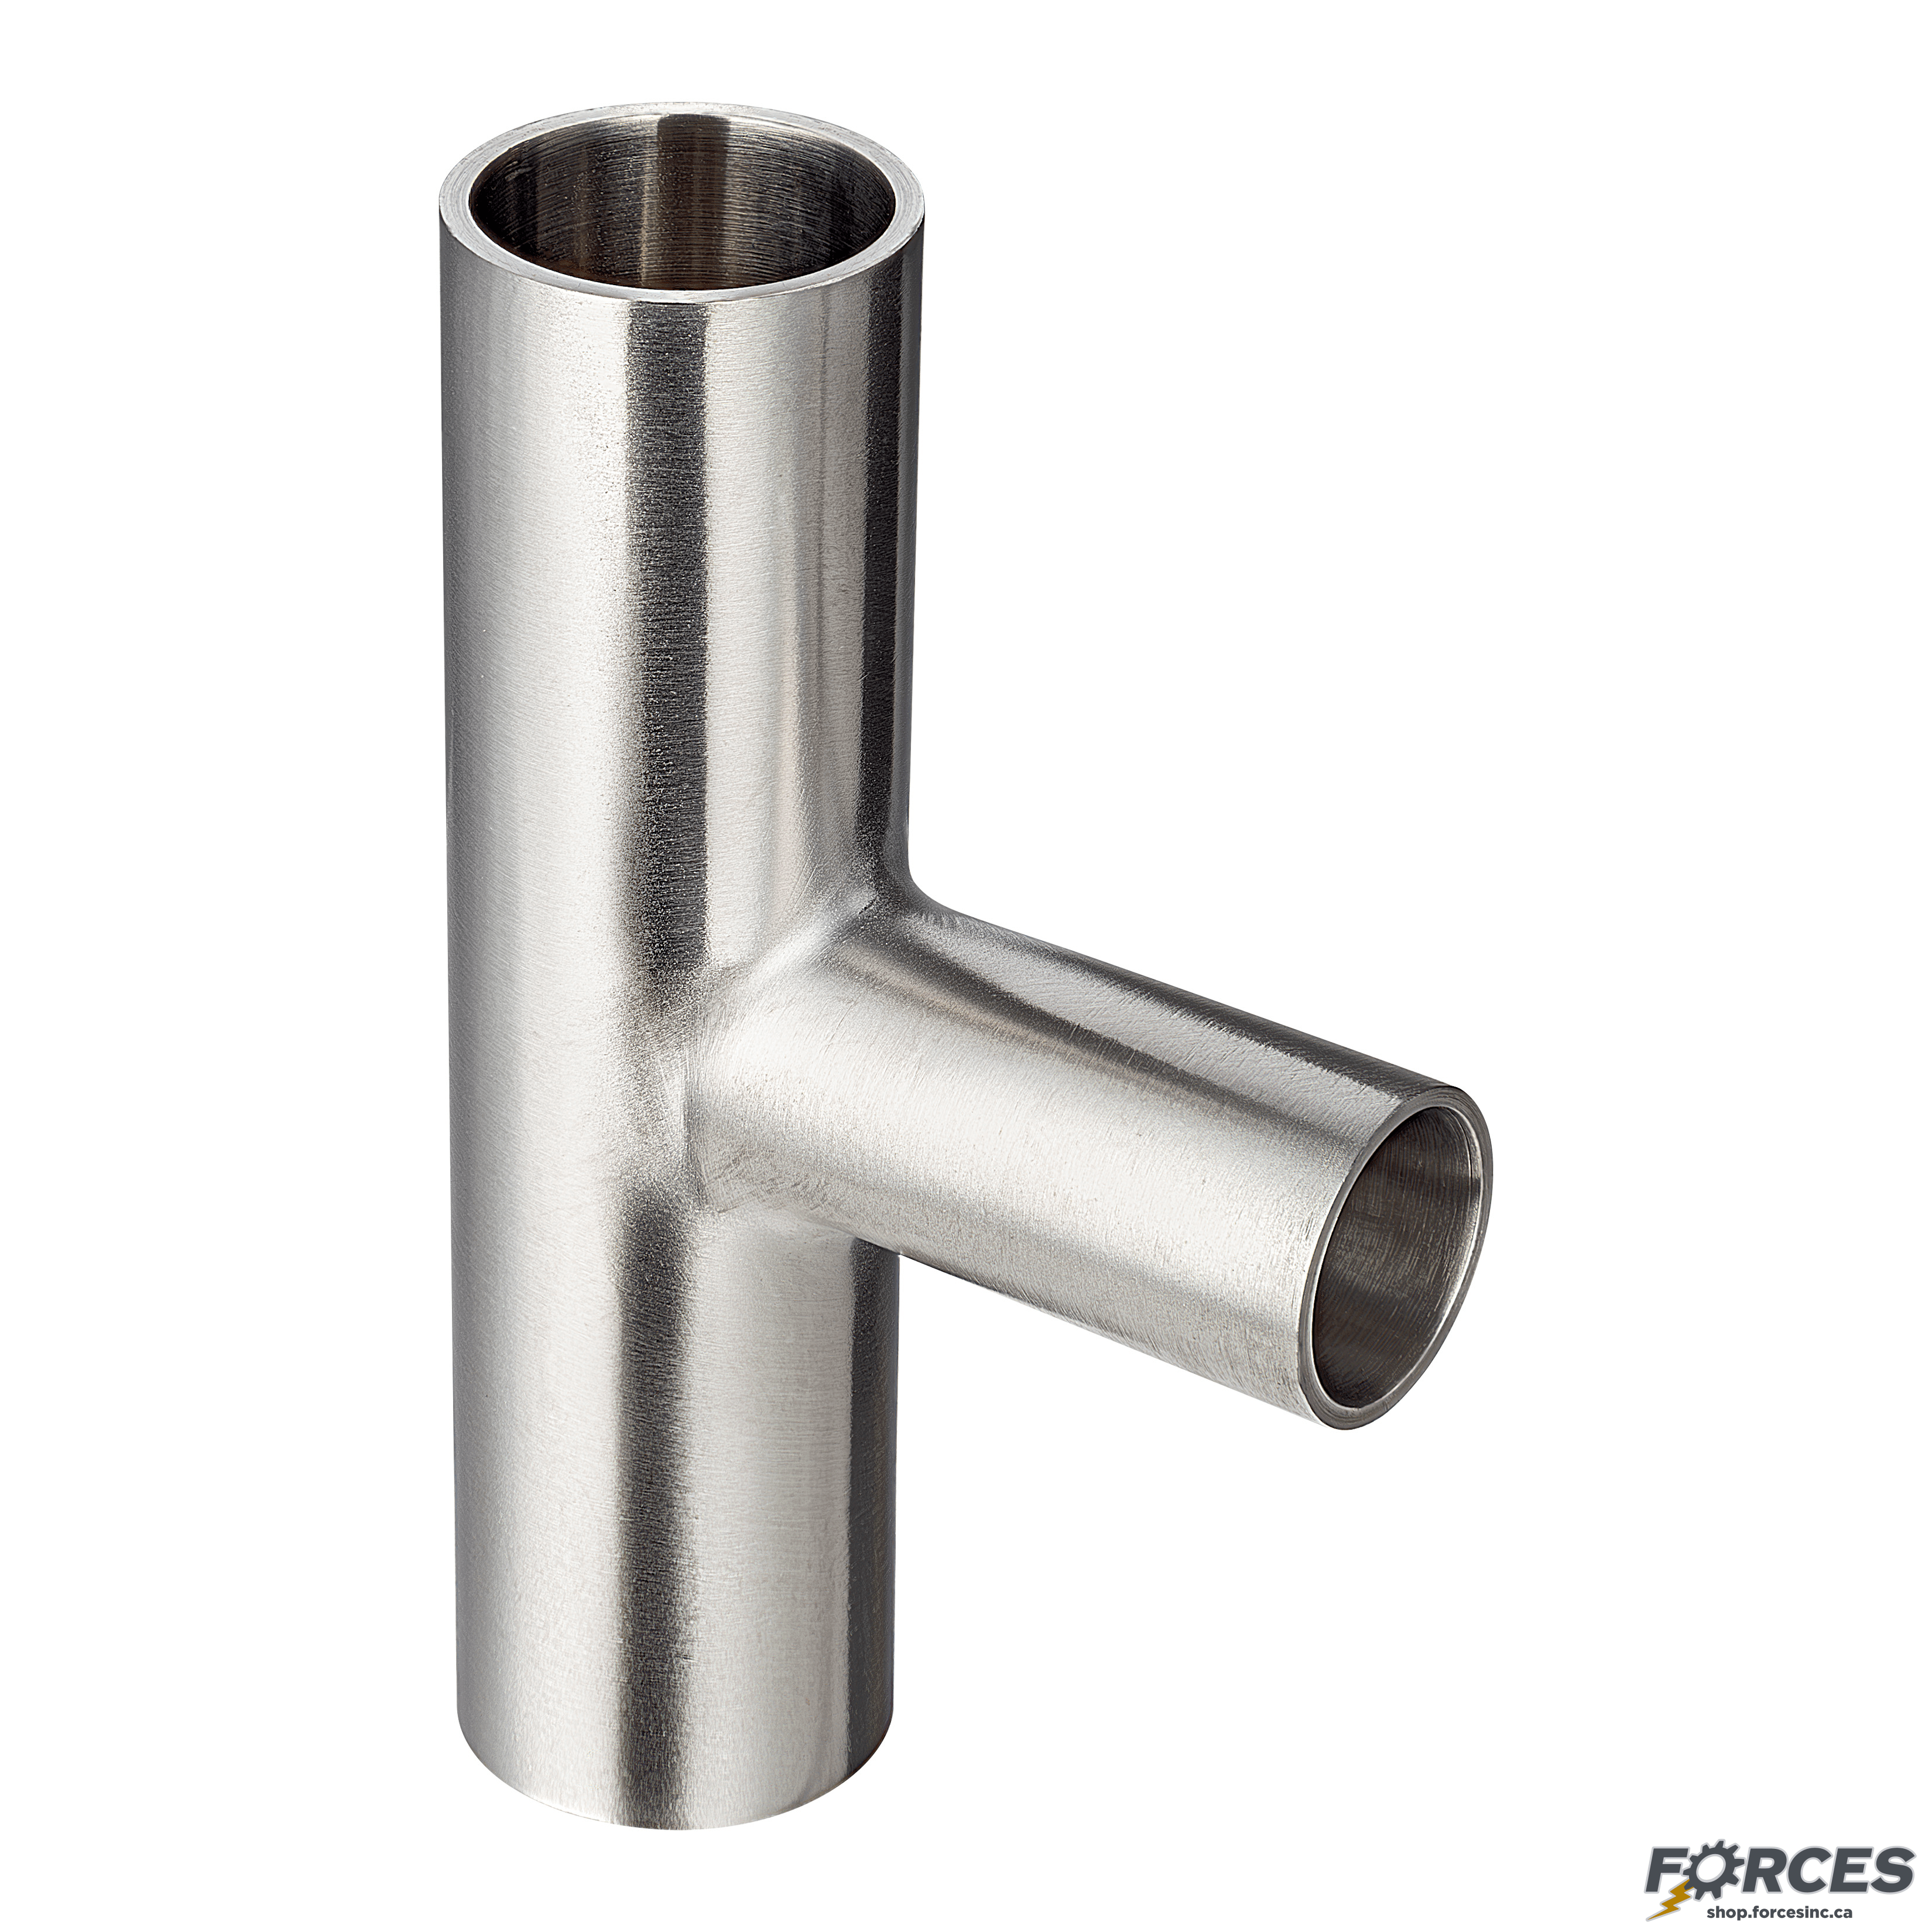 1" x 3/4" Butt Weld Tee Reducer - Stainless Steel 304 - Forces Inc